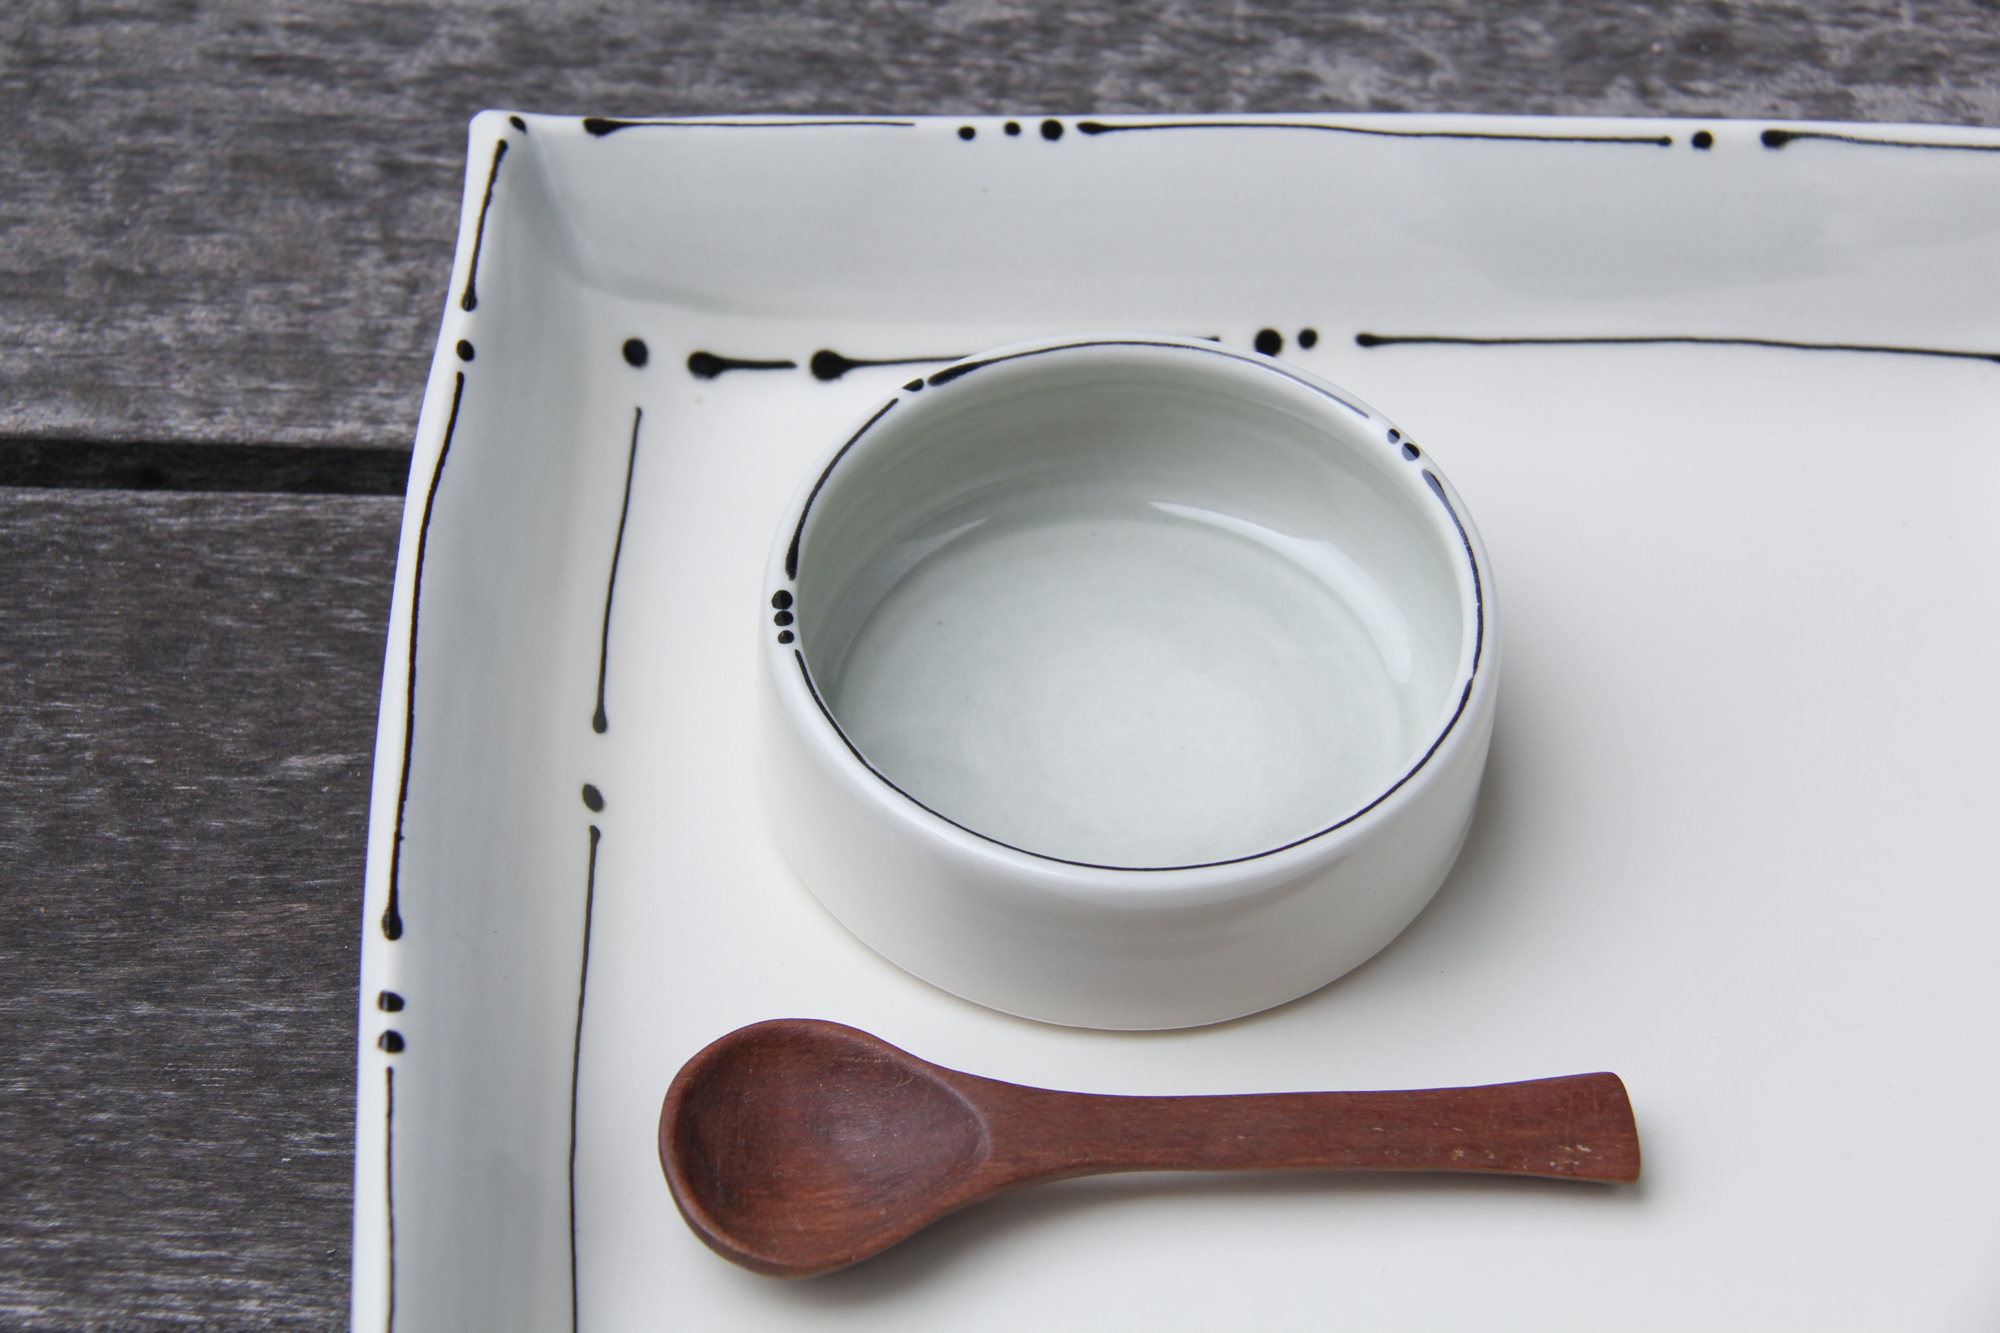 Iris Dorton: Medium Tray with Circle Dot Line Motif, comes with Wood Spoon and Dish Product Image 3 of 11